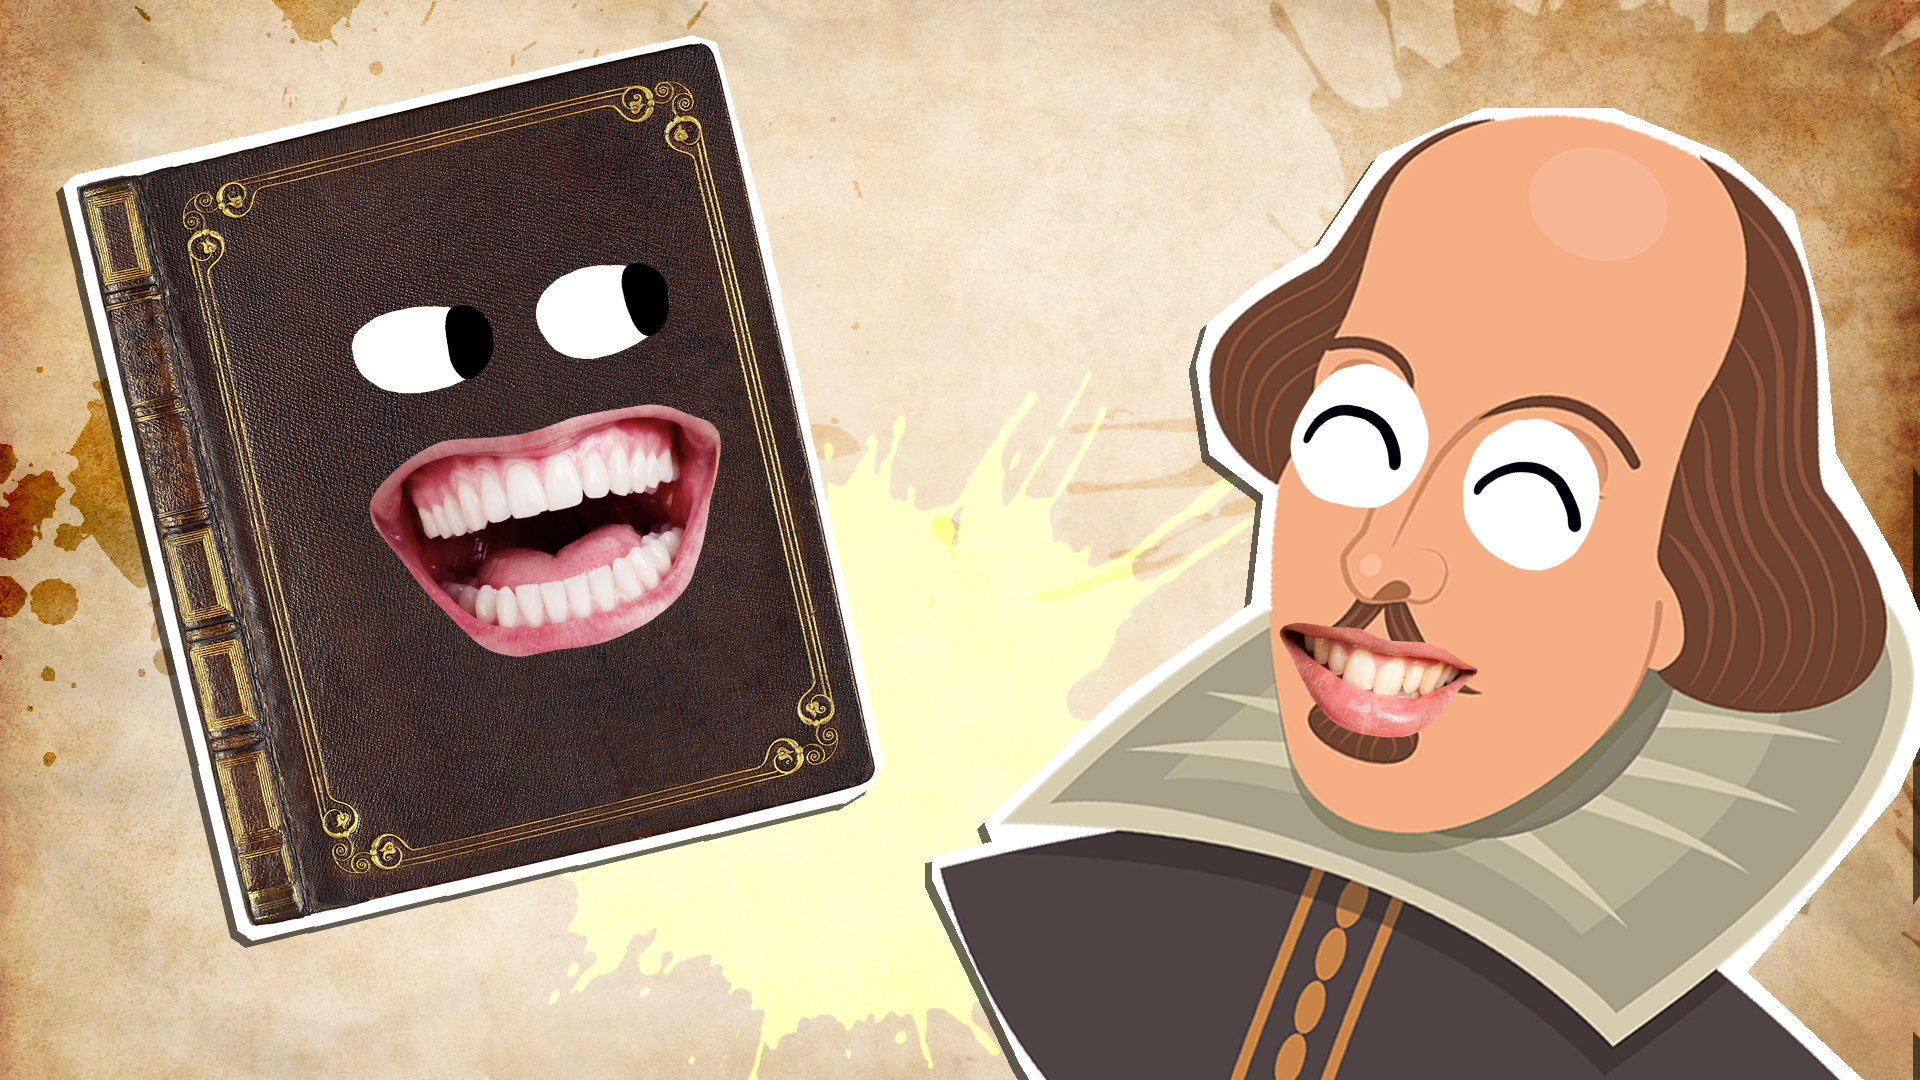 A laughing book and William Shakespeare